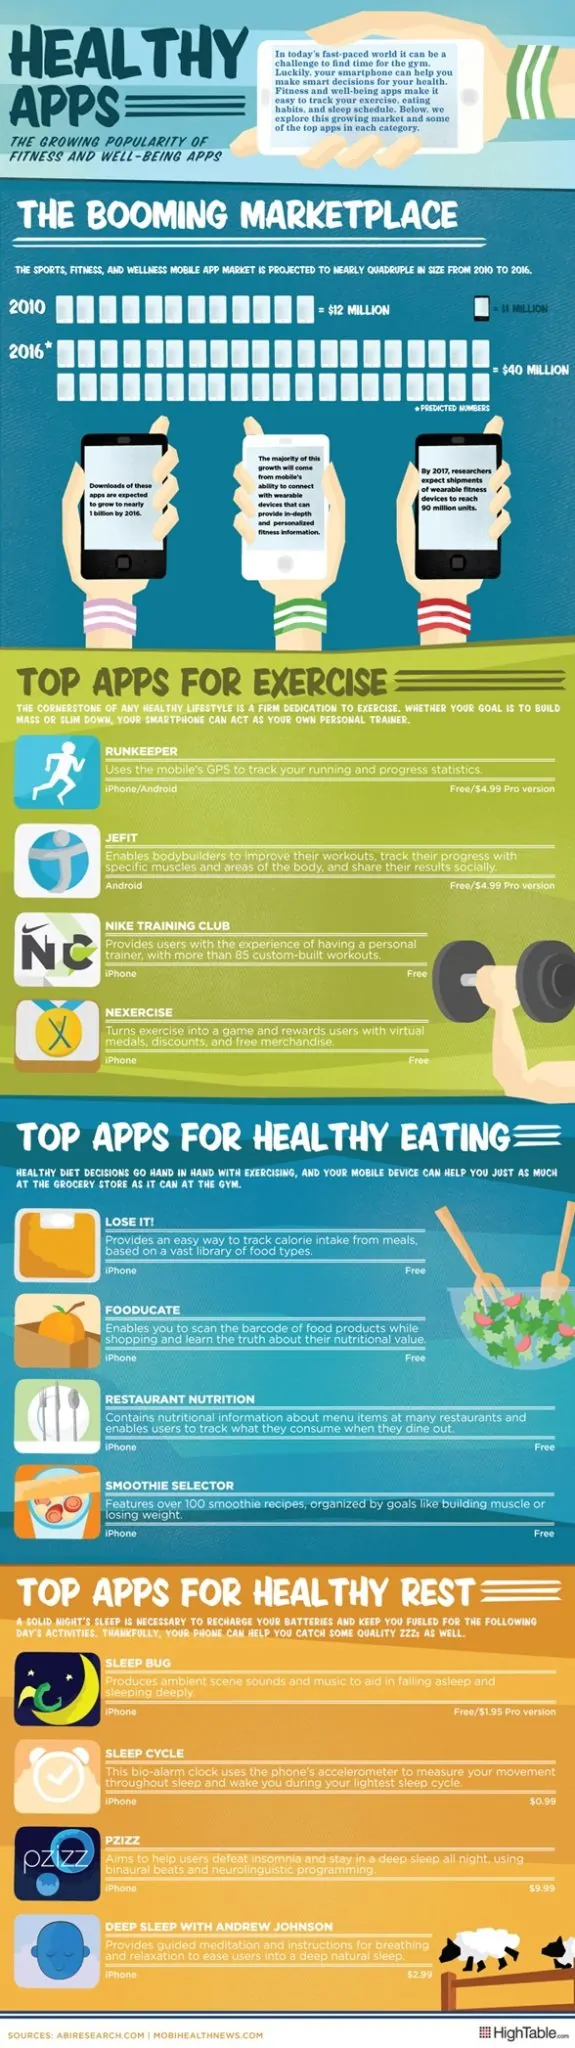 health-apps-972